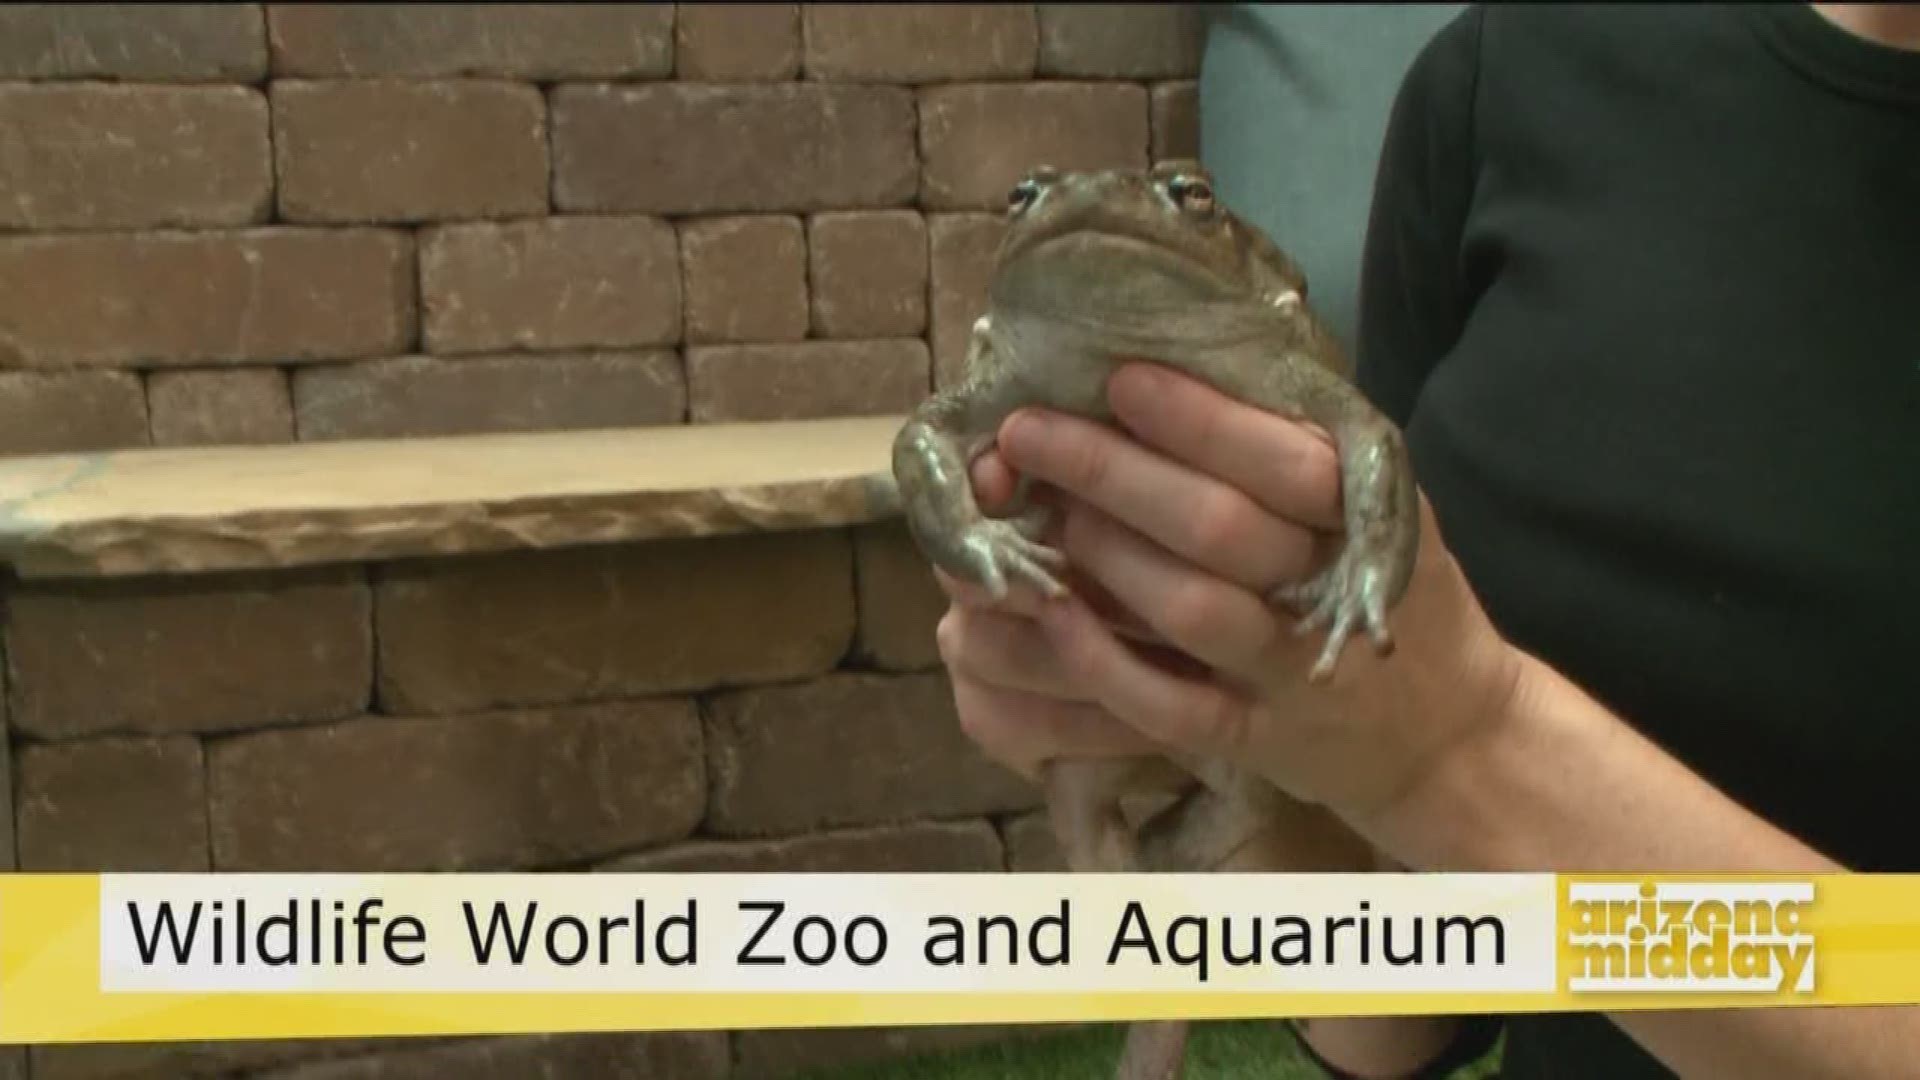 Kristy Morcom from the Wildlife World Zoo and Aquarium brought Mr. Toad and Toadina in for a visit today.